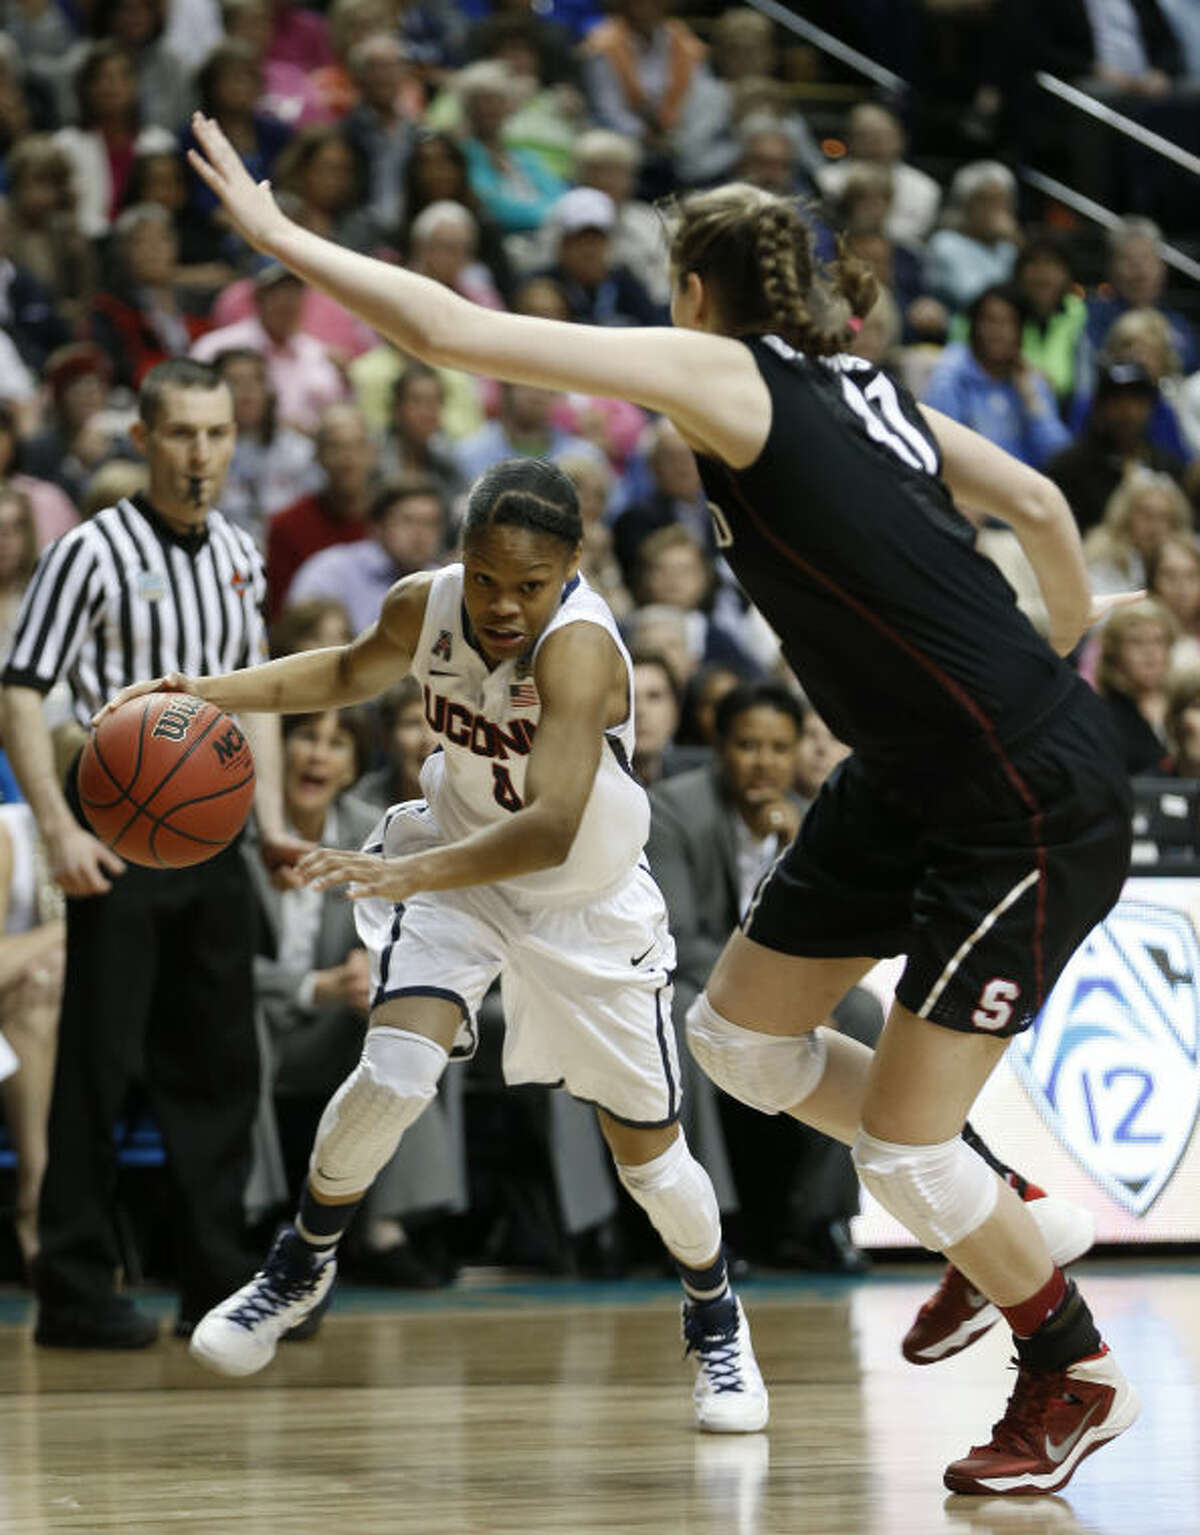 Connecticut guard Moriah Jefferson (4) moves by Stanford forward Bonnie Samuelson (41) during the first half of the semifinal game in the Final Four of the NCAA women's college basketball tournament, Sunday, April 6, 2014, in Nashville, Tenn. (AP Photo/Mark Humphrey)